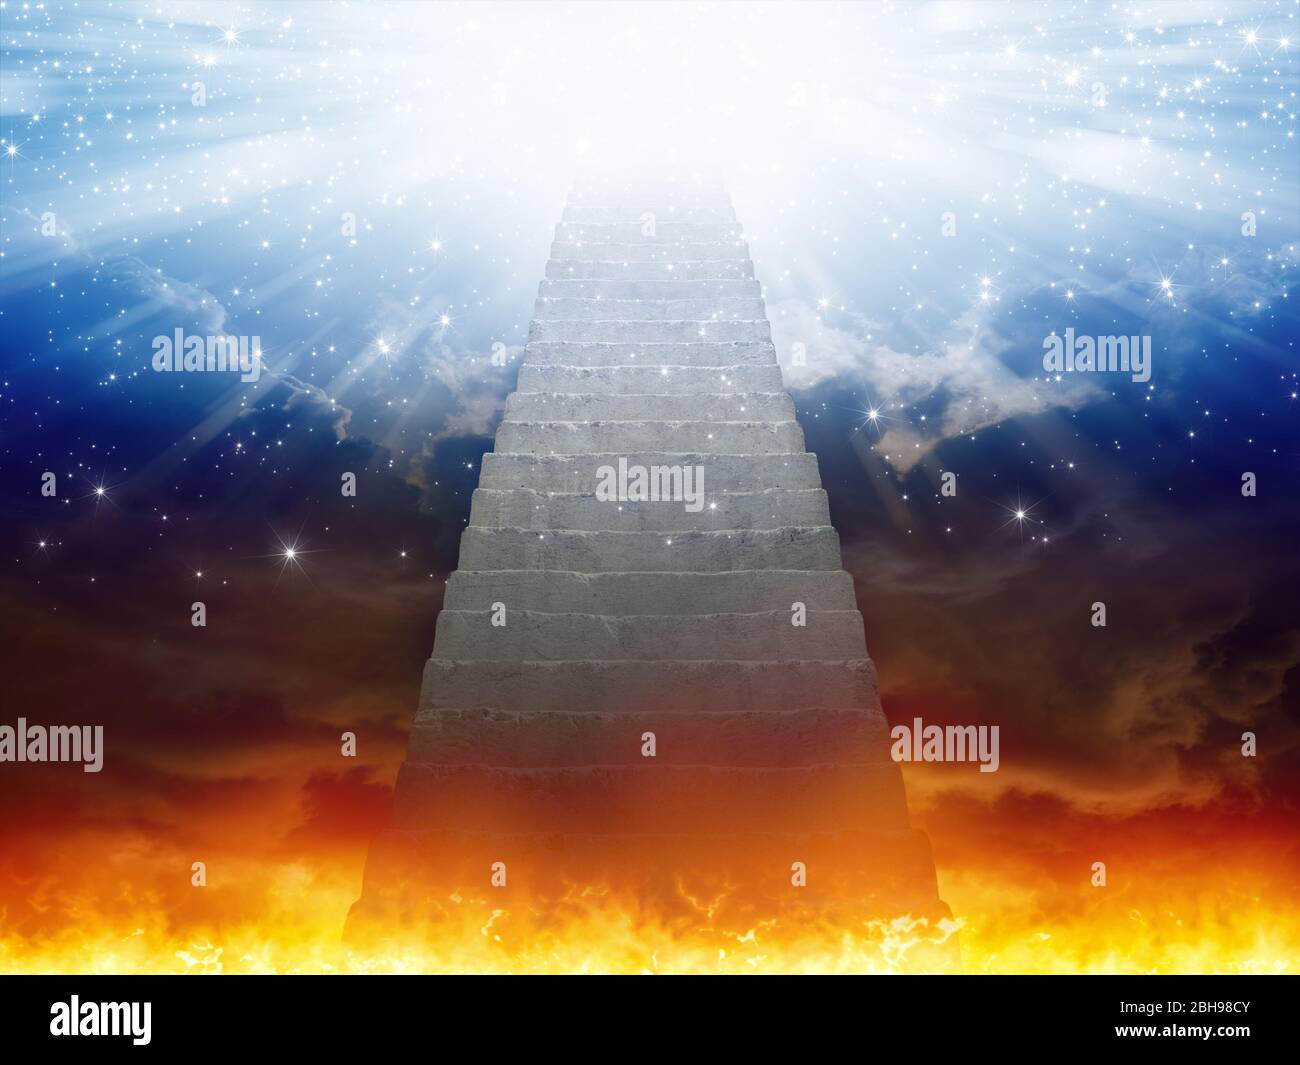 Dramatic Religious Background Heaven And Hell Staircase To Heaven Light Of Hope From Blue Skies Stock Photo Alamy